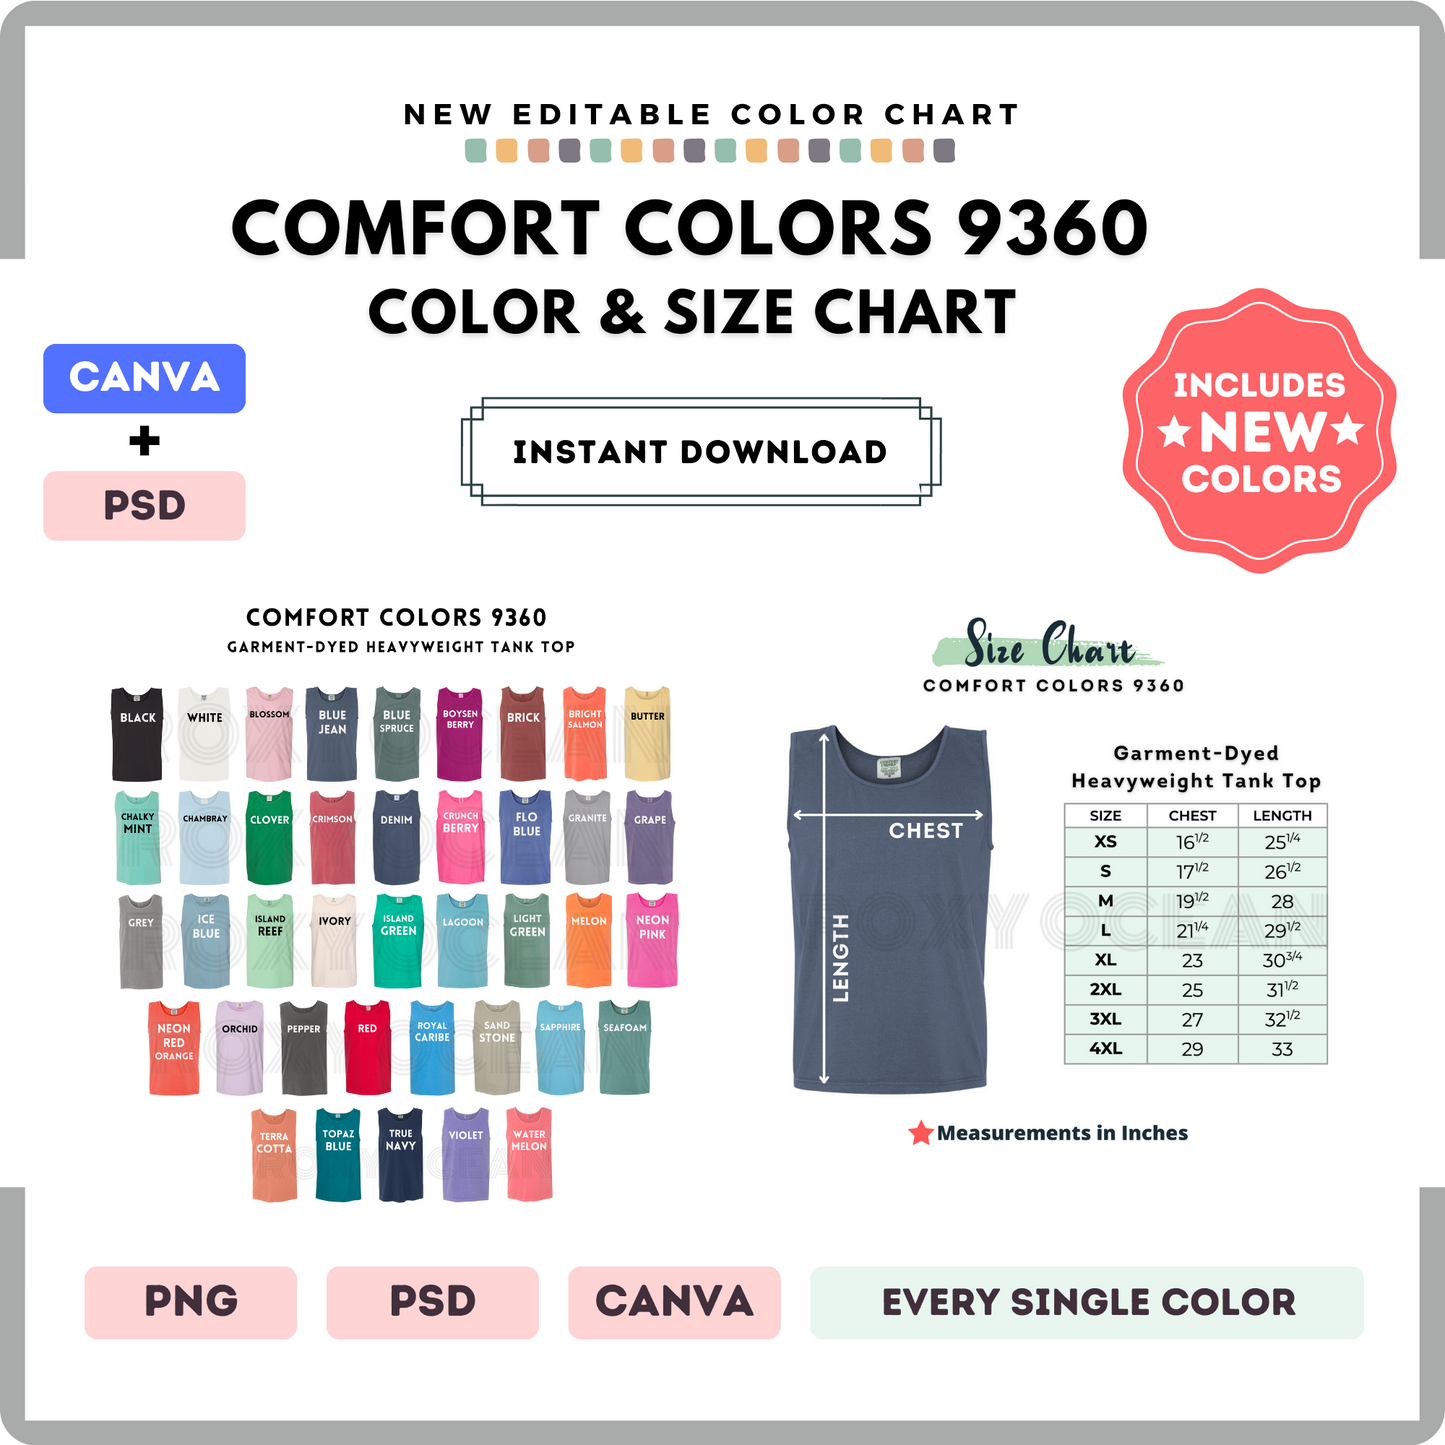 Comfort Colors 9360 Color and Size Chart